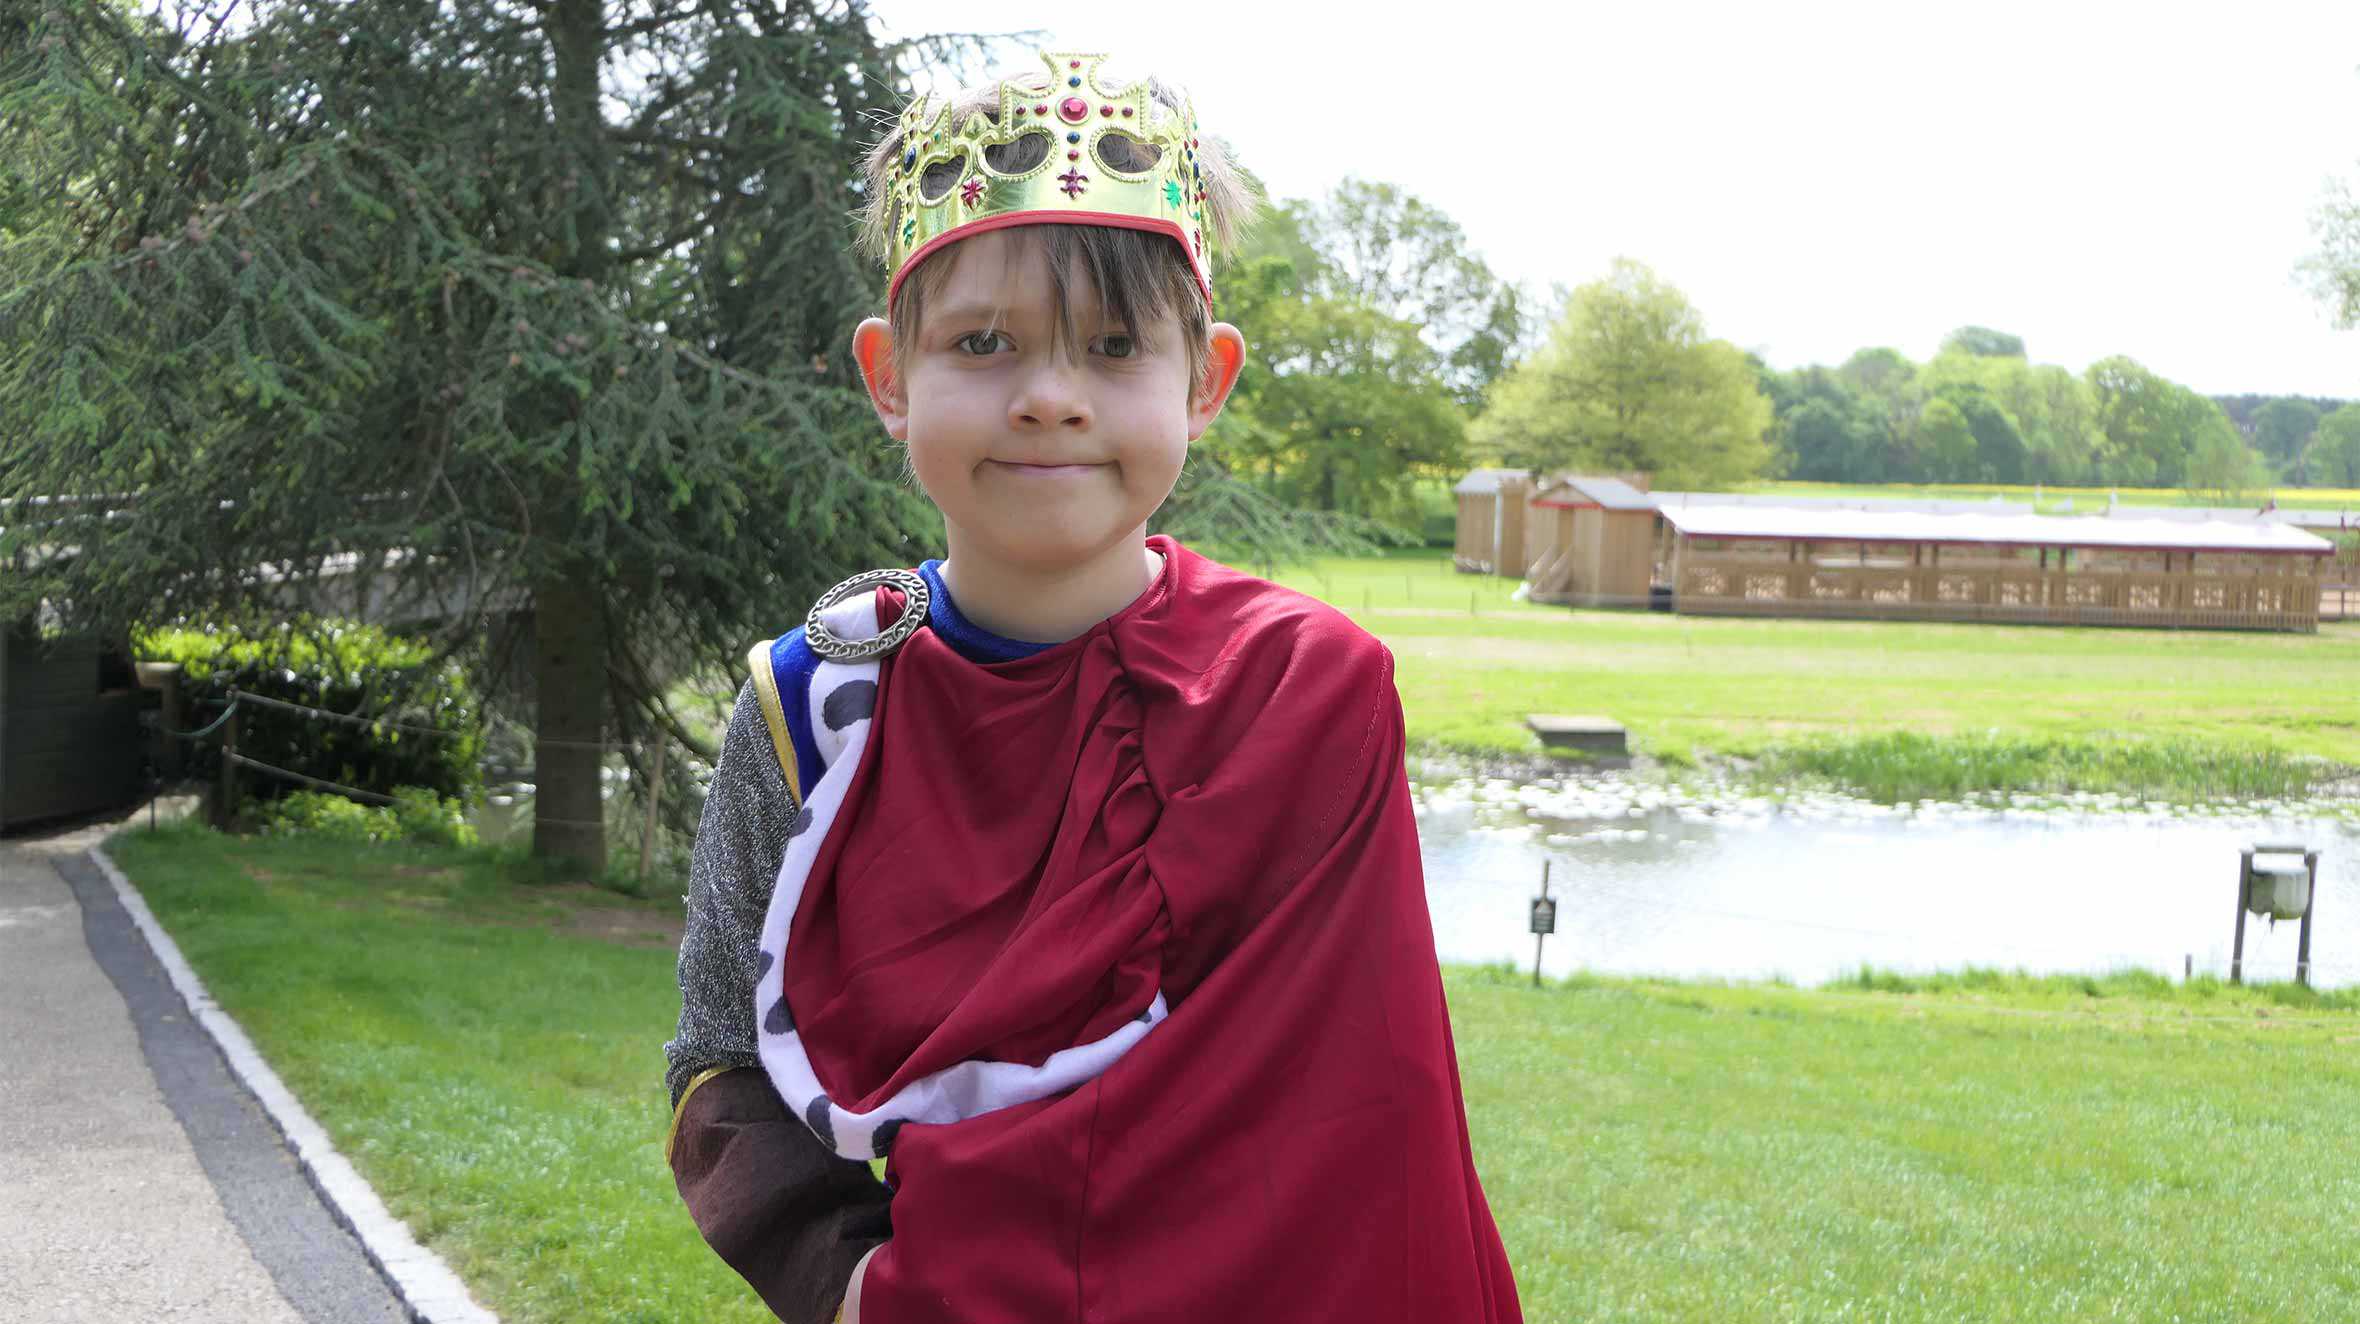 Wish child, Danny dressed as a king